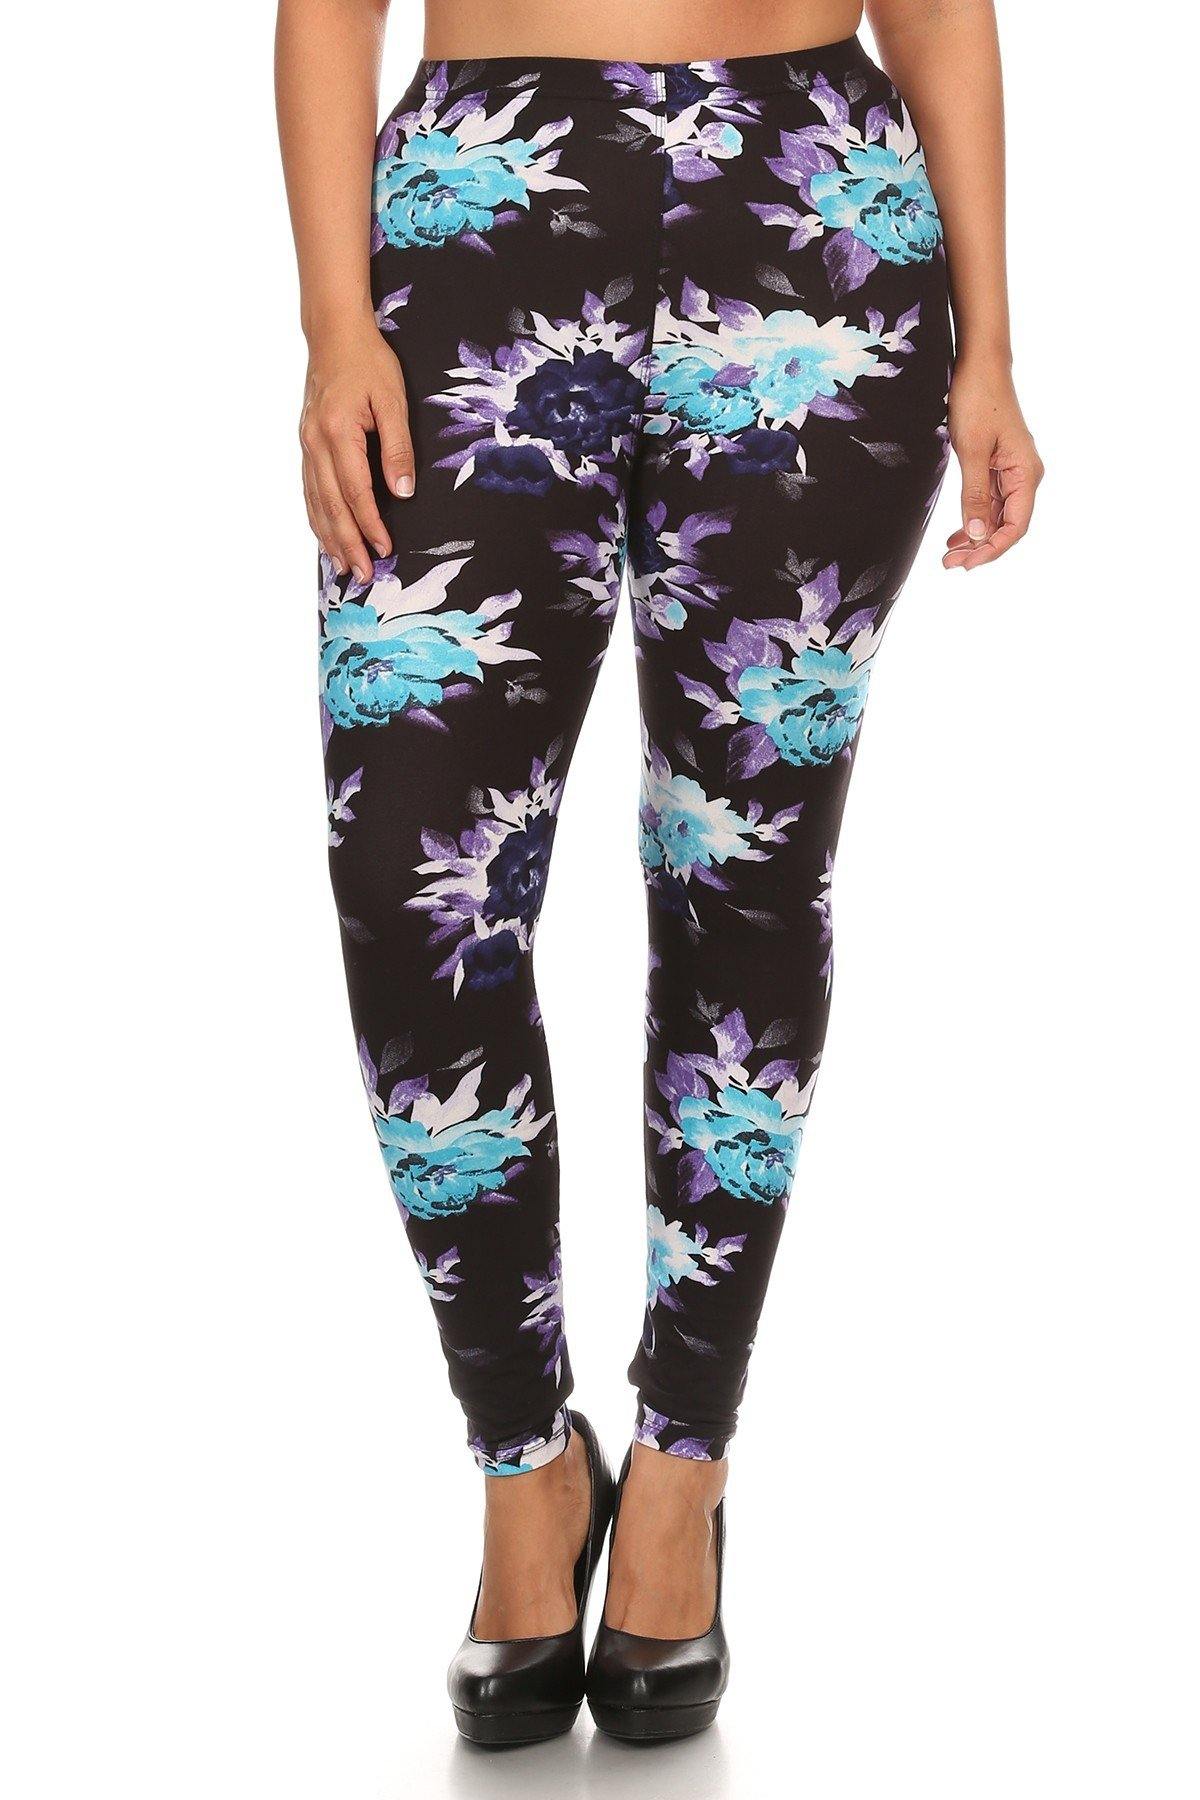 Plus Size Floral Print, Full Length Leggings In A Slim Fitting Style With A Banded High Waist - Pearlara